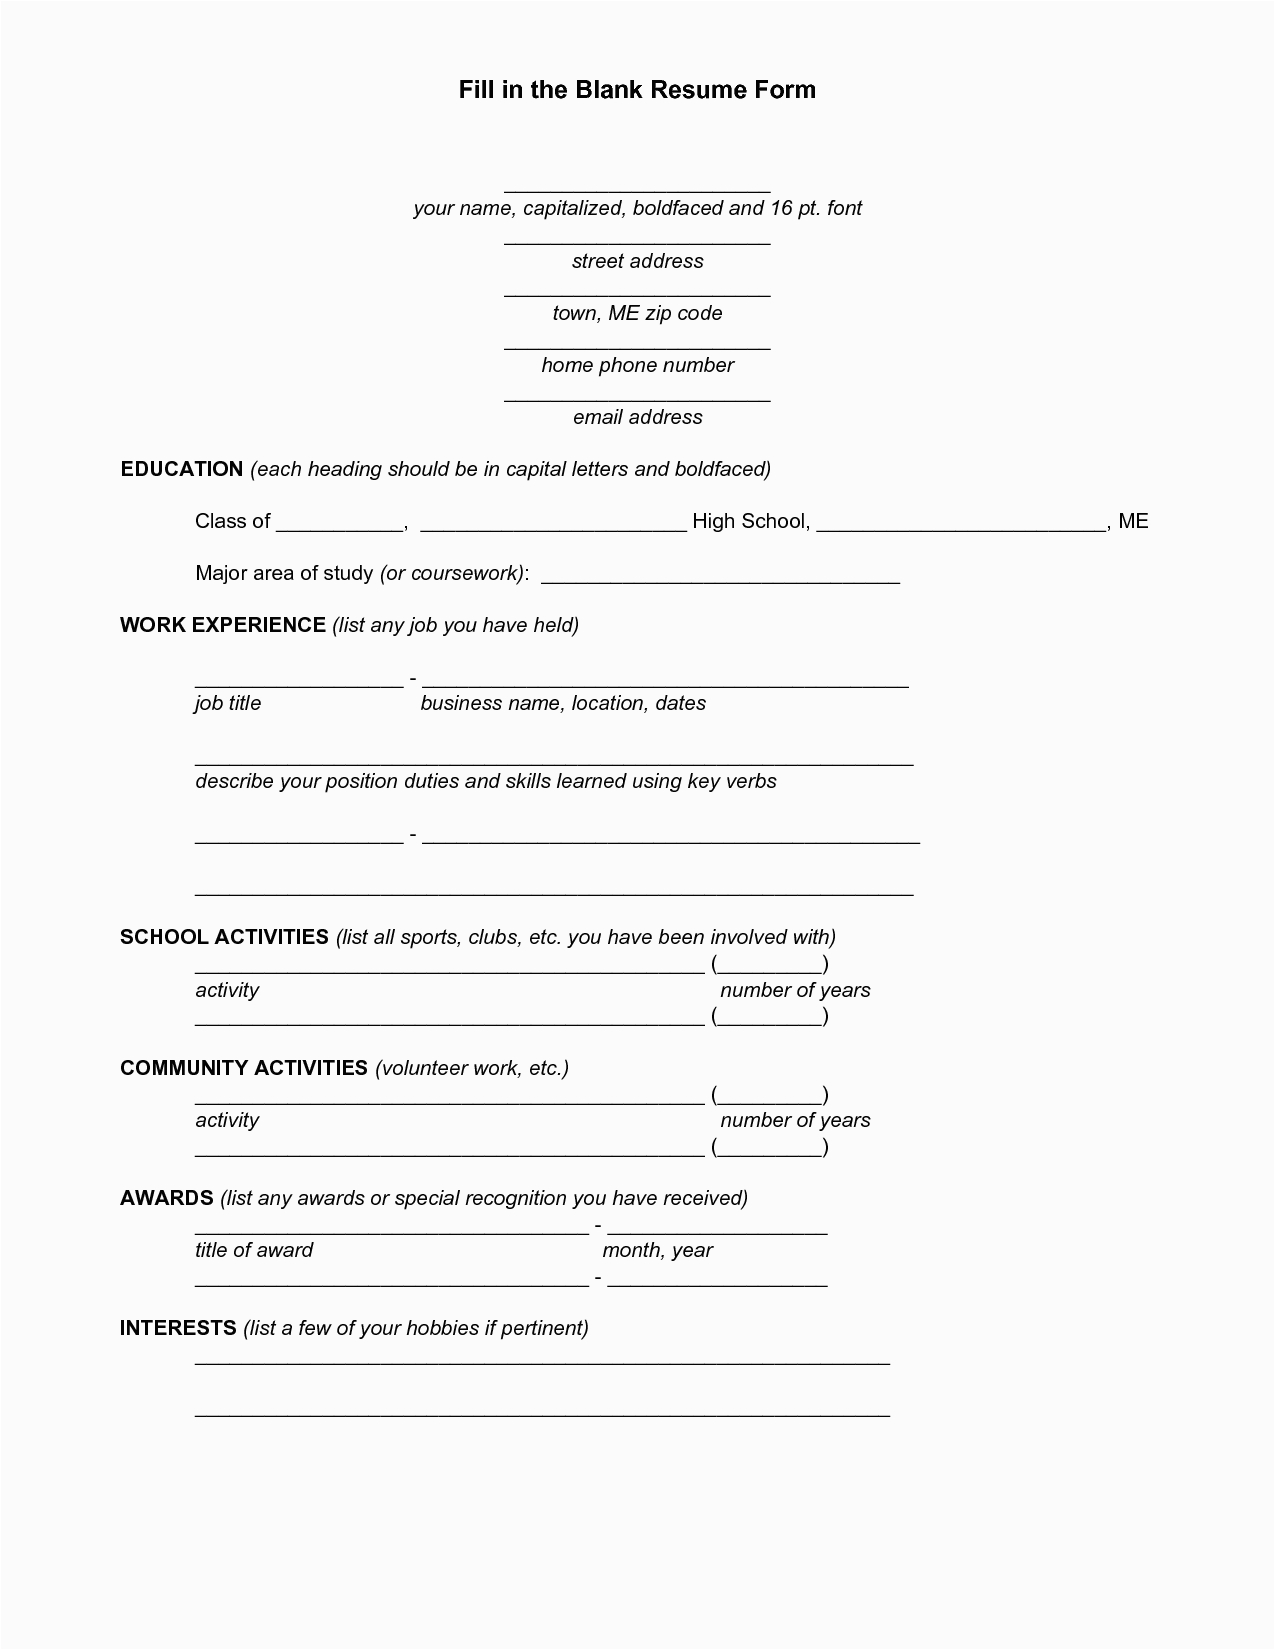 Fill In the Blank Resume Template for Highschool Students Blank Resume Template for High School Students